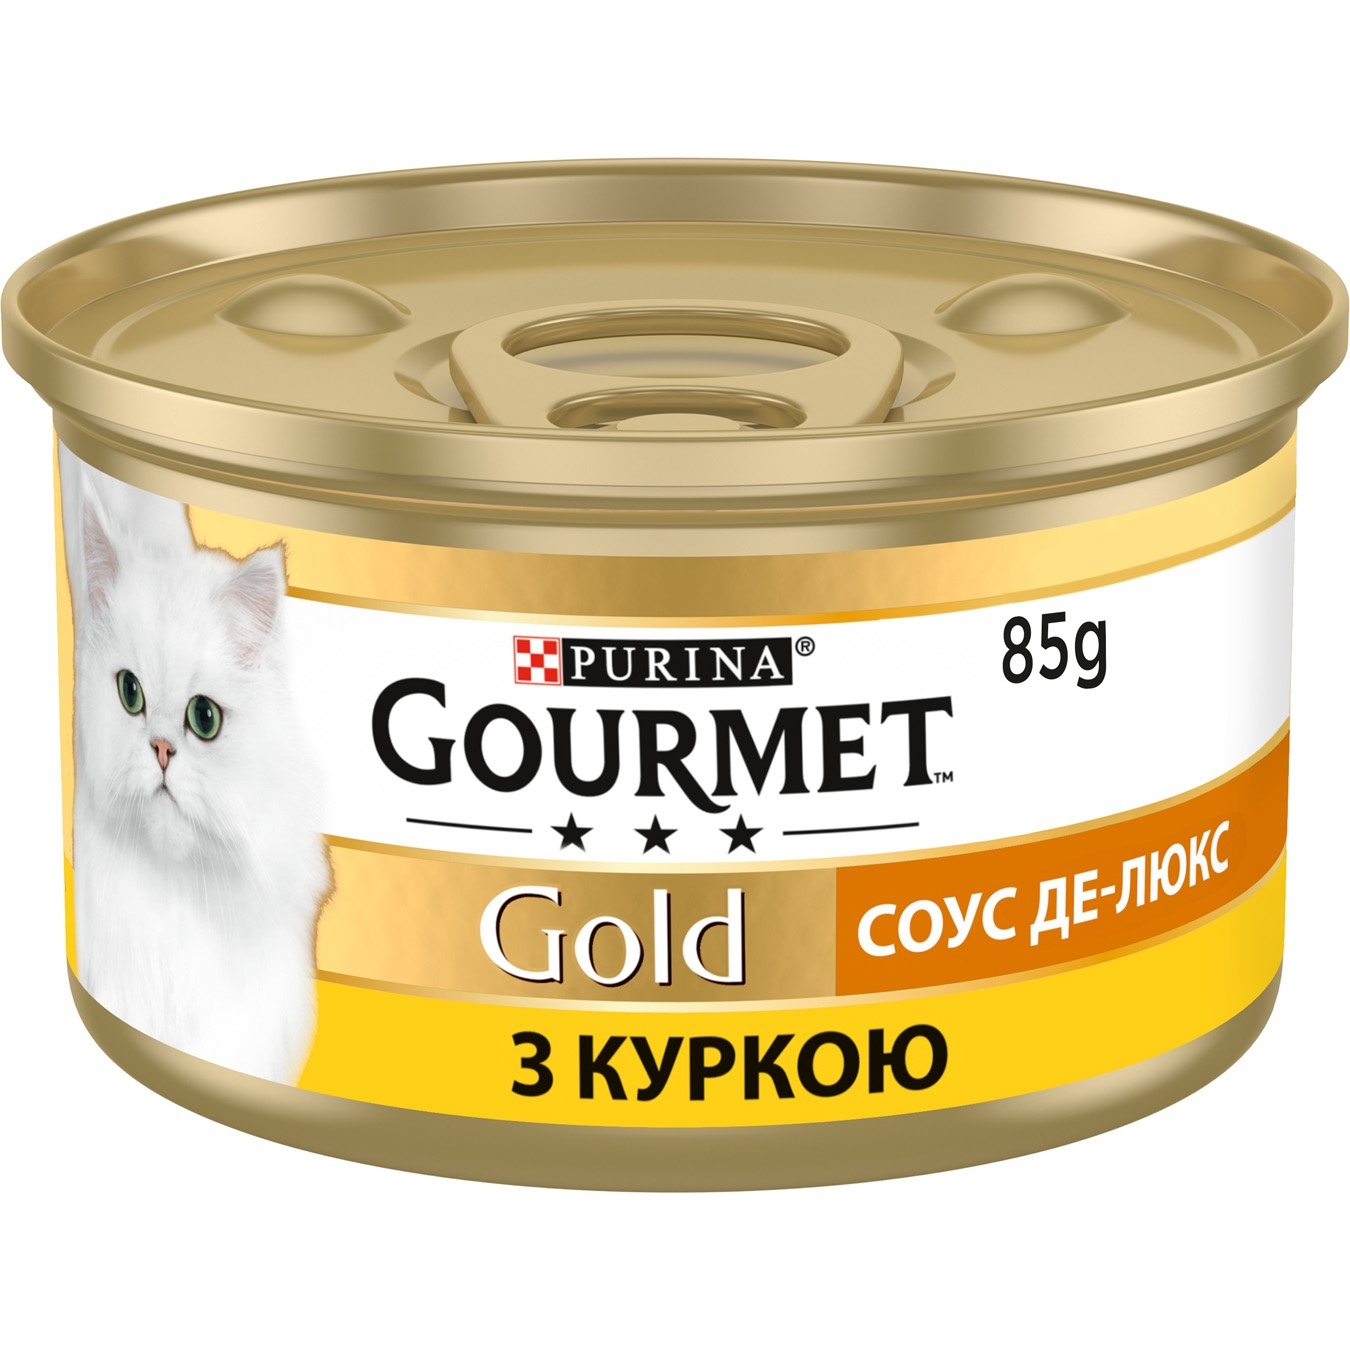 Purina Gourmet with chicken in sauce cat food 85g